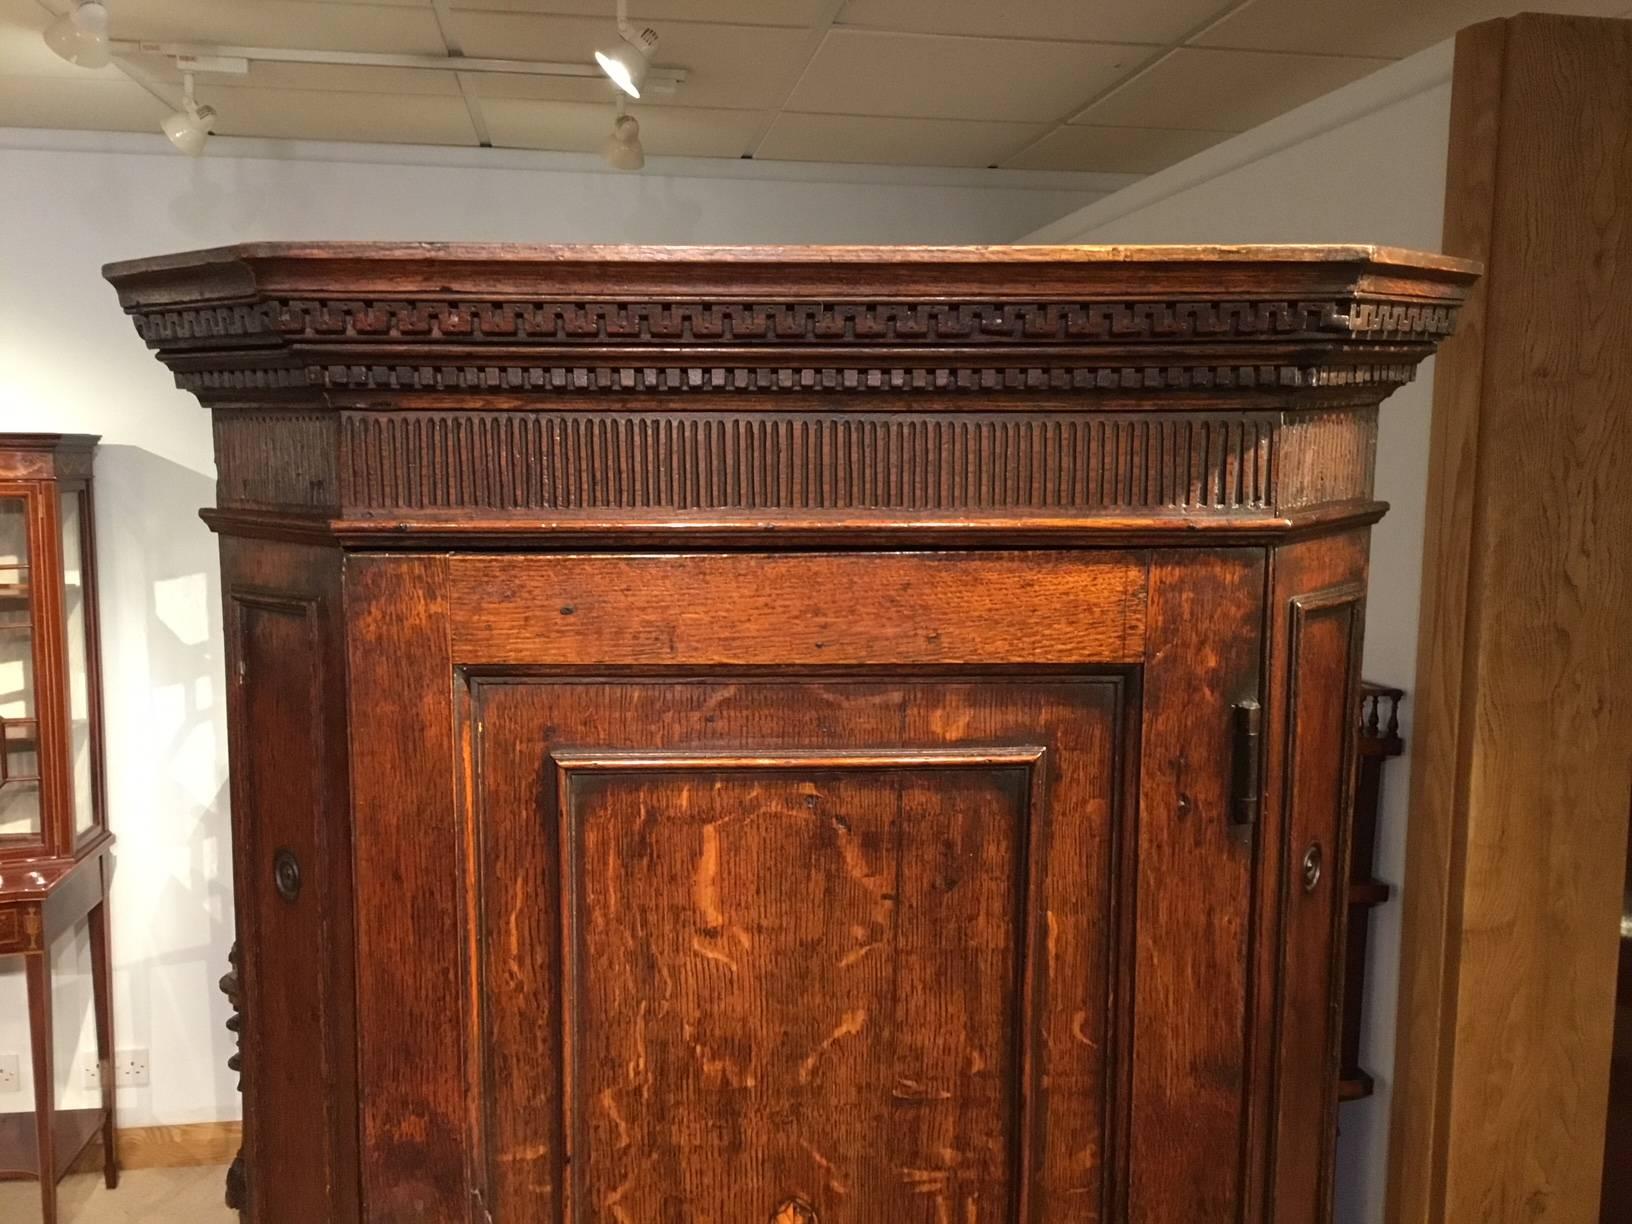 An oak George III Period antique corner cupboard. With a Greek key and dentil moulded cornice above the rectangular oak panelled door with central shell inlaid paterae, flanked by angular ends with turned roundels and opens to reveal a shaped